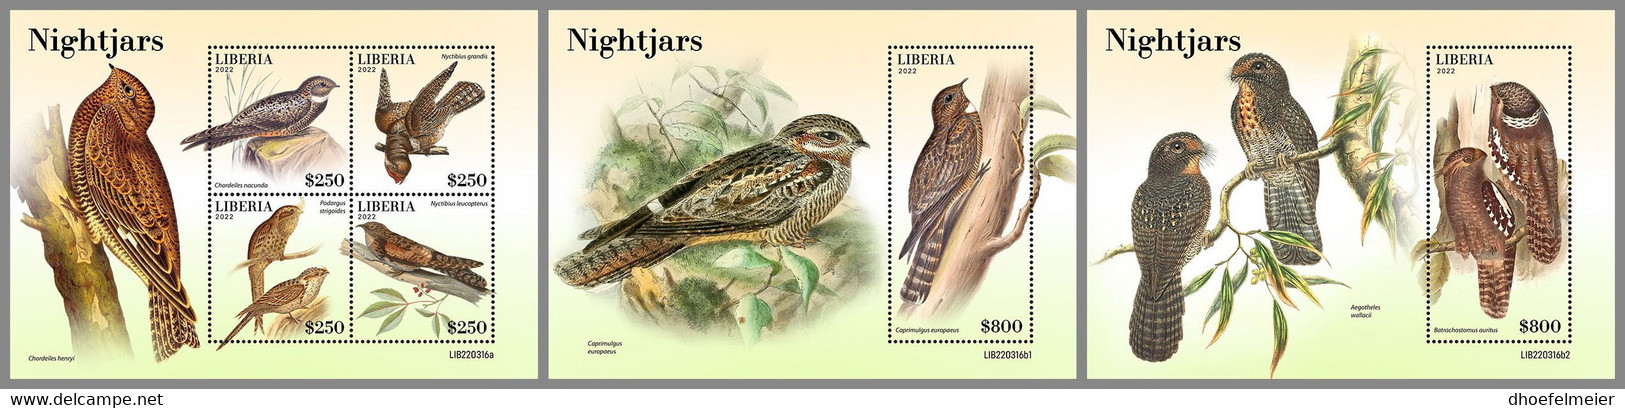 LIBERIA 2022 MNH Nightjars Nachtschwalben Engoulevents M/S+2S/S - OFFICIAL ISSUE - DHQ2249 - Rondini